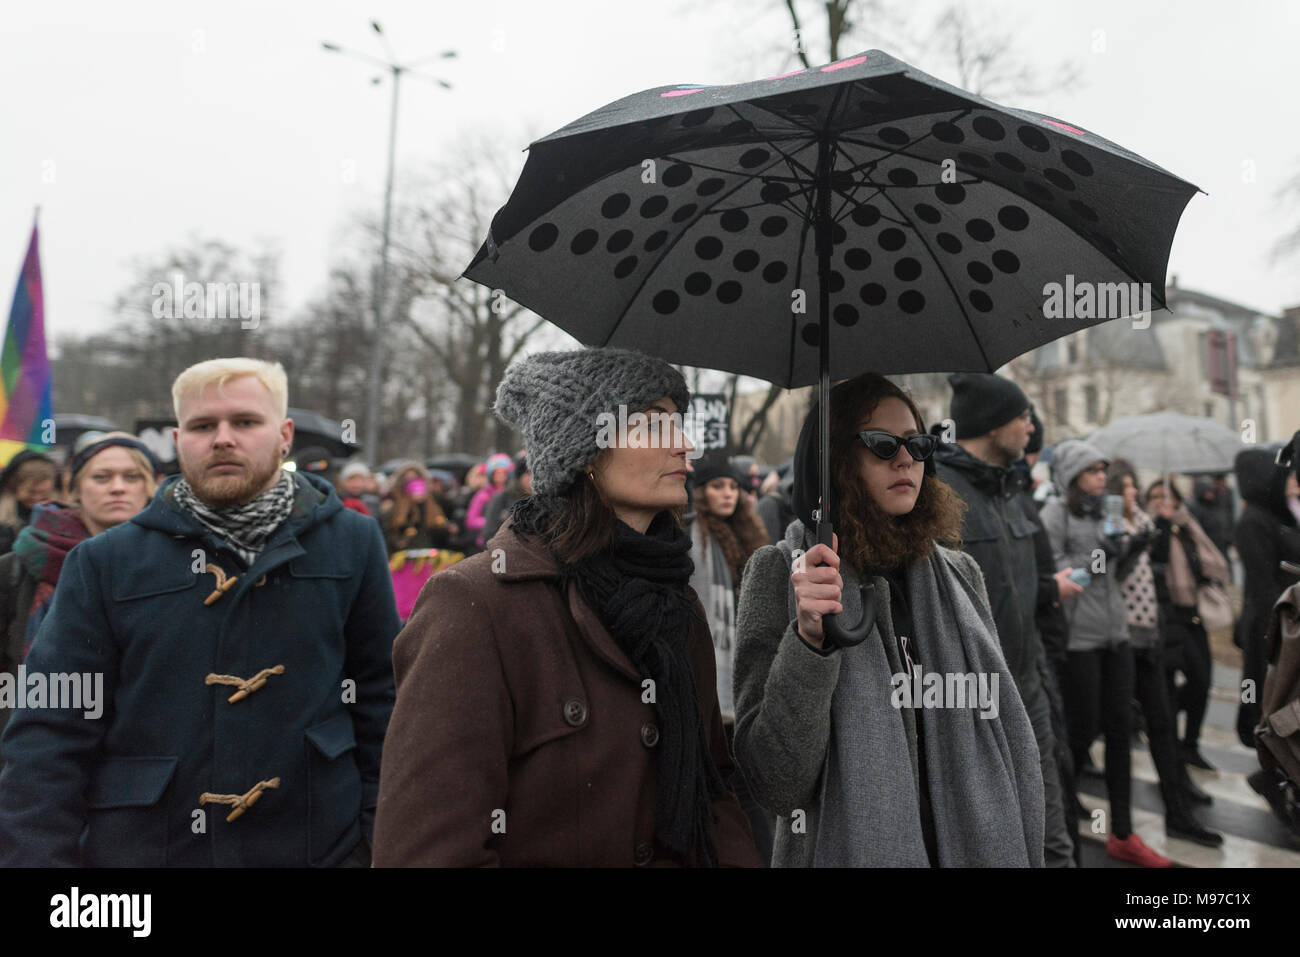 Poznan, Greater Poland, Poland. 23rd March 2018. Black Friday - National Women's Strike. On Monday 19th March, a group of deputies from the ruling party, Law and Justice (PiS) and Kukiz15, in the Justice and Human Rights Committee, gave a positive opinion on the draft Stop Abortion Act. The initiative, which leads Kaja Godek to lead, wants to tighten the already restrictive anti-abortion law in Poland. On Wednesday or Thursday, the parliamentary Social Policy and Family Commission was to take place. Plenary voting was also planned. Credit: Slawomir Kowalewski/Alamy Live News Stock Photo